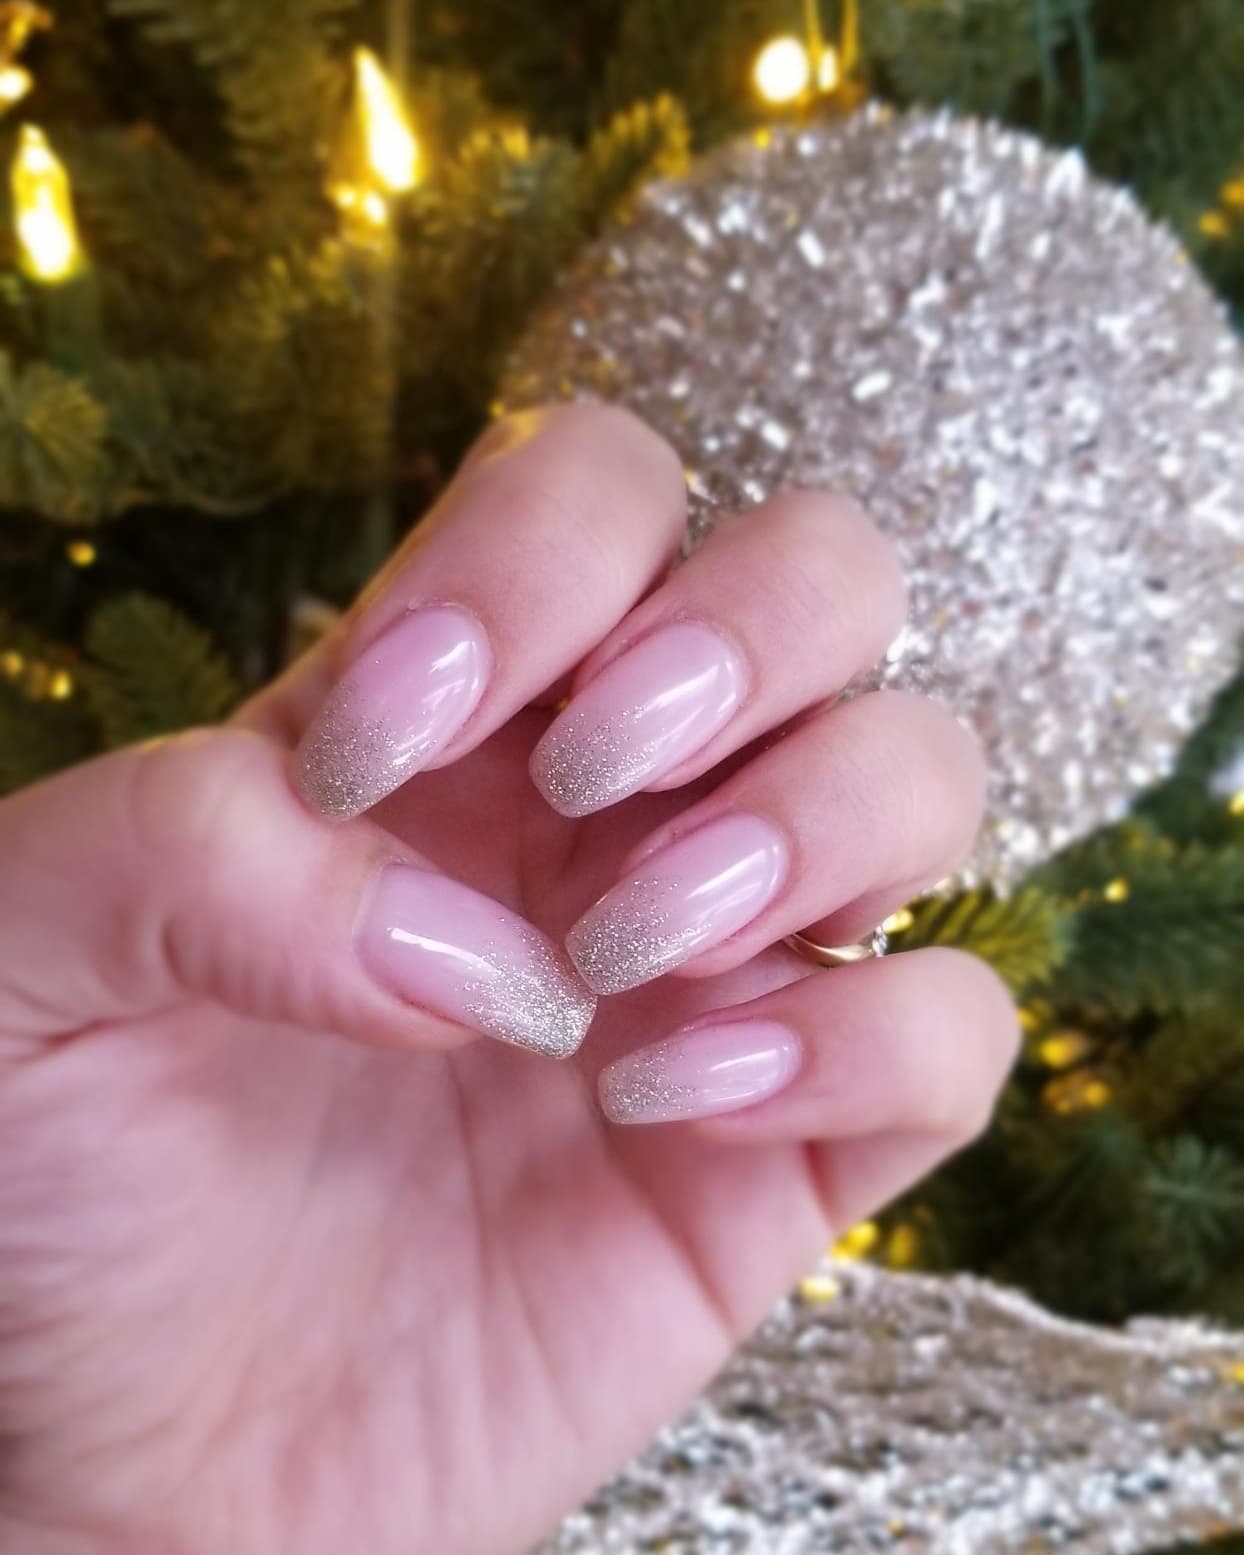 Mystic River Hair and Nails Salon 7 Roosevelt Ave, Mystic Connecticut 06355